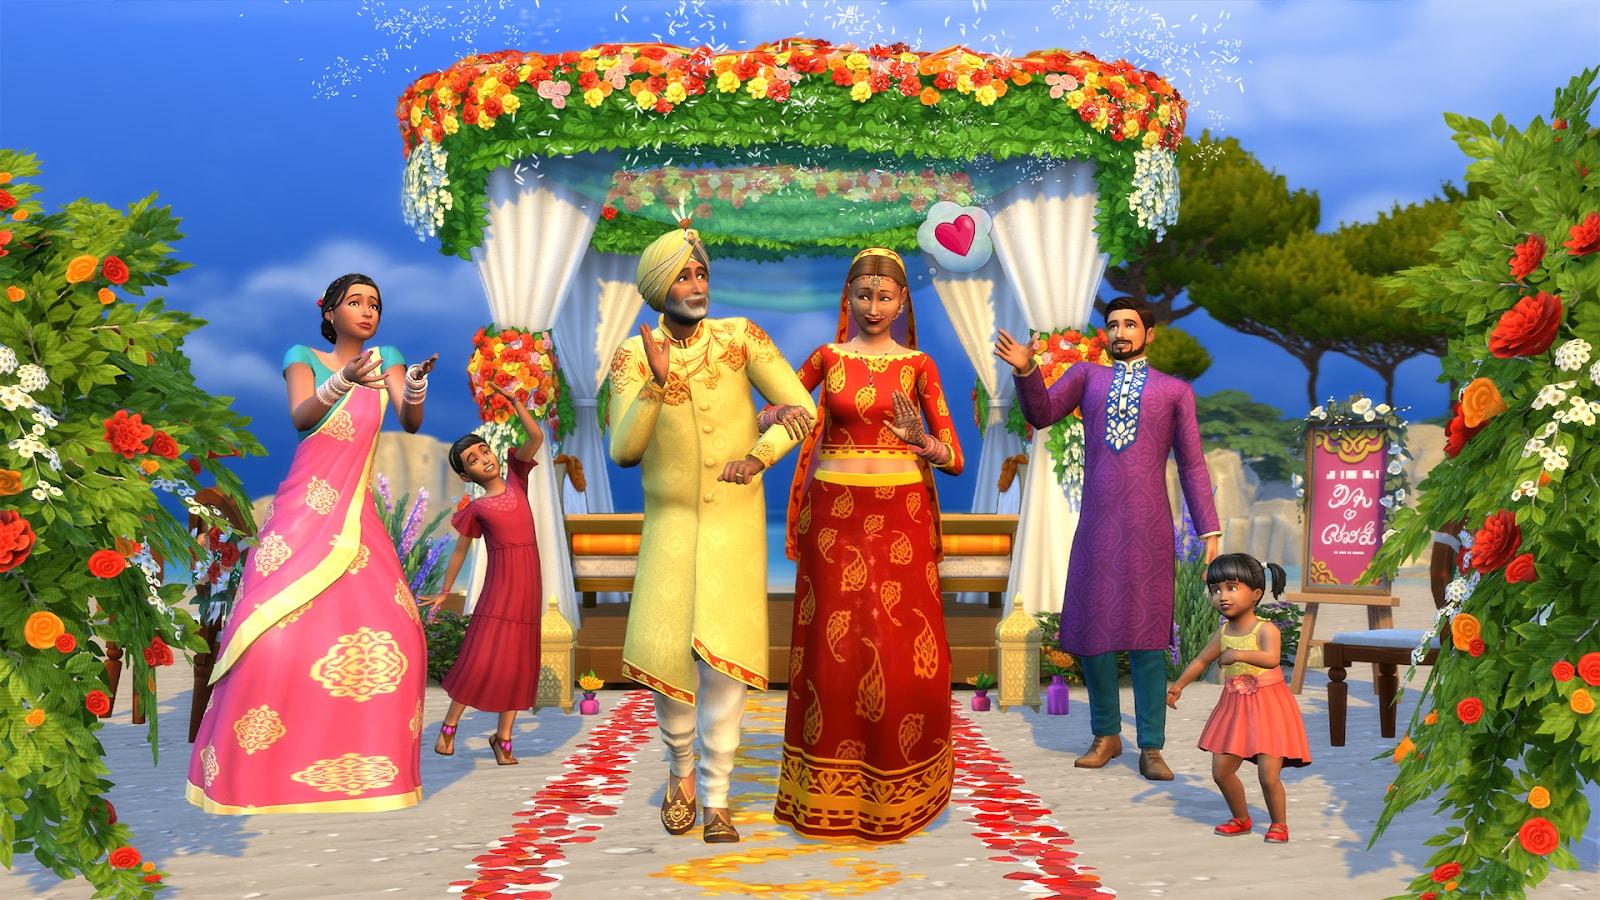 A wedding ceremony in The Sims